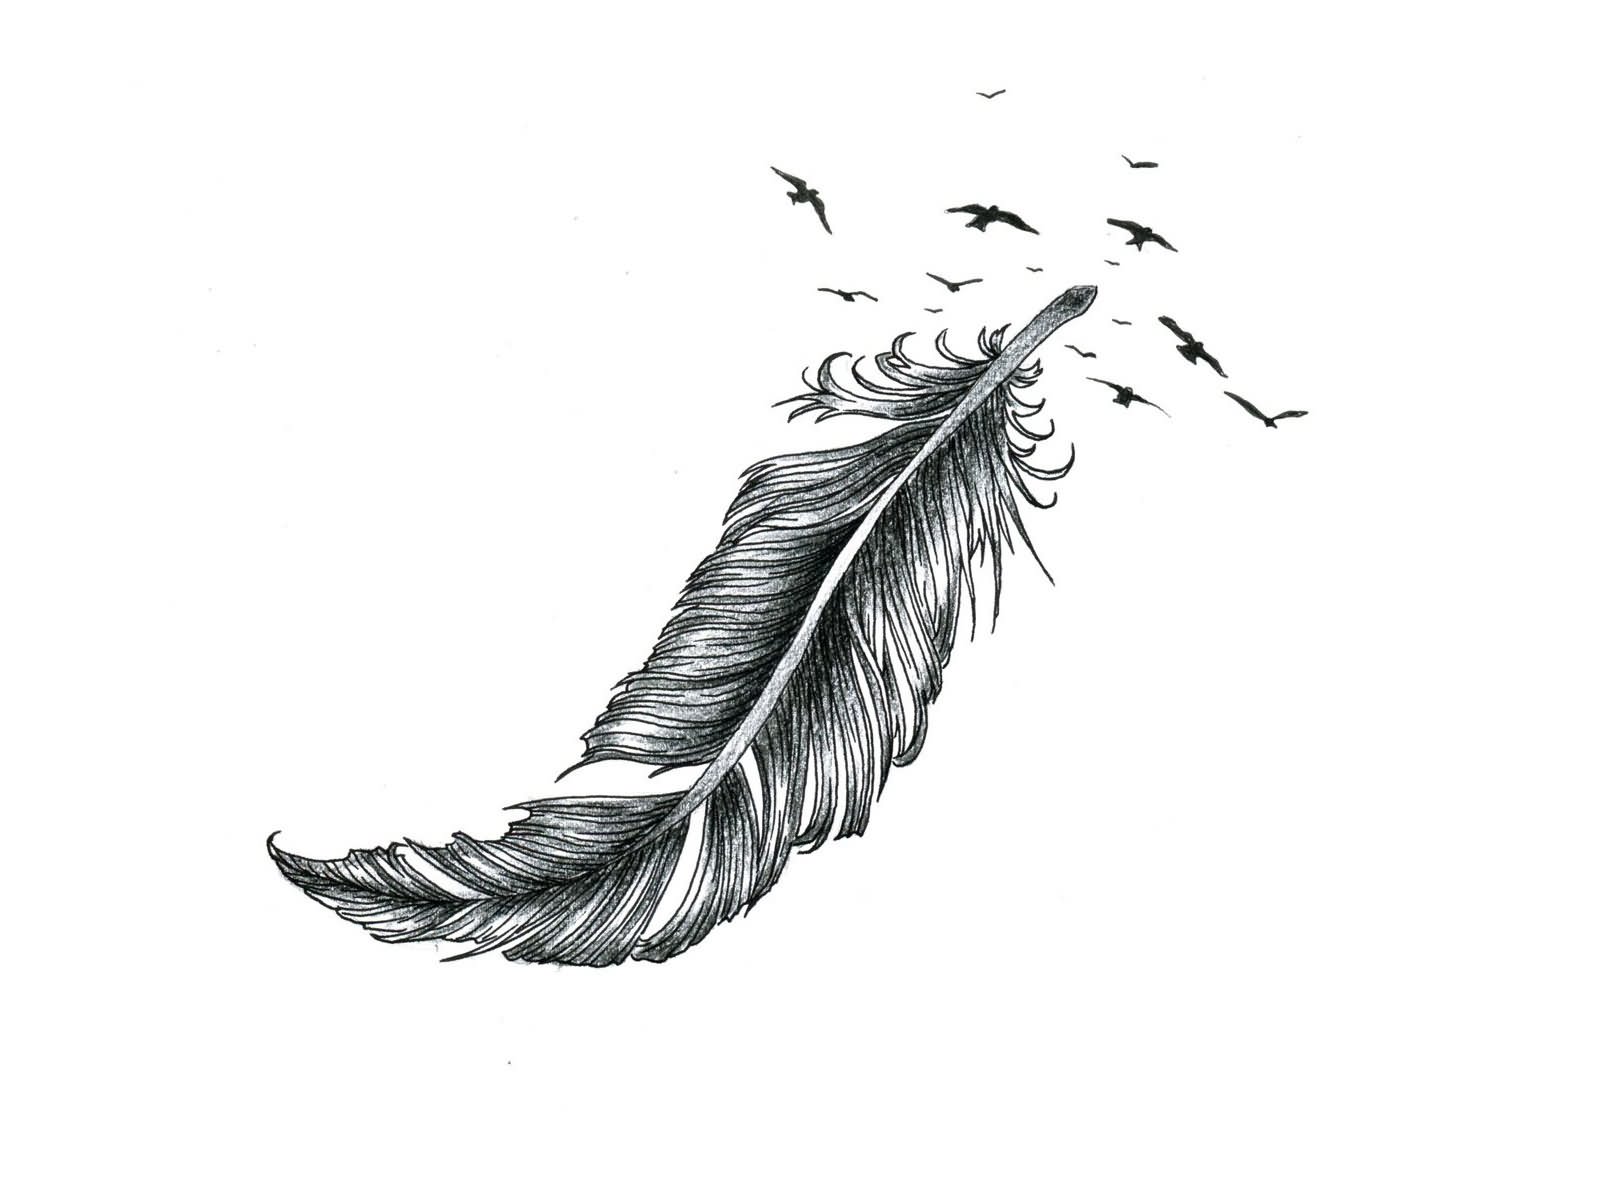 Classic Black Feather With Flying Pigeons Tattoo Design